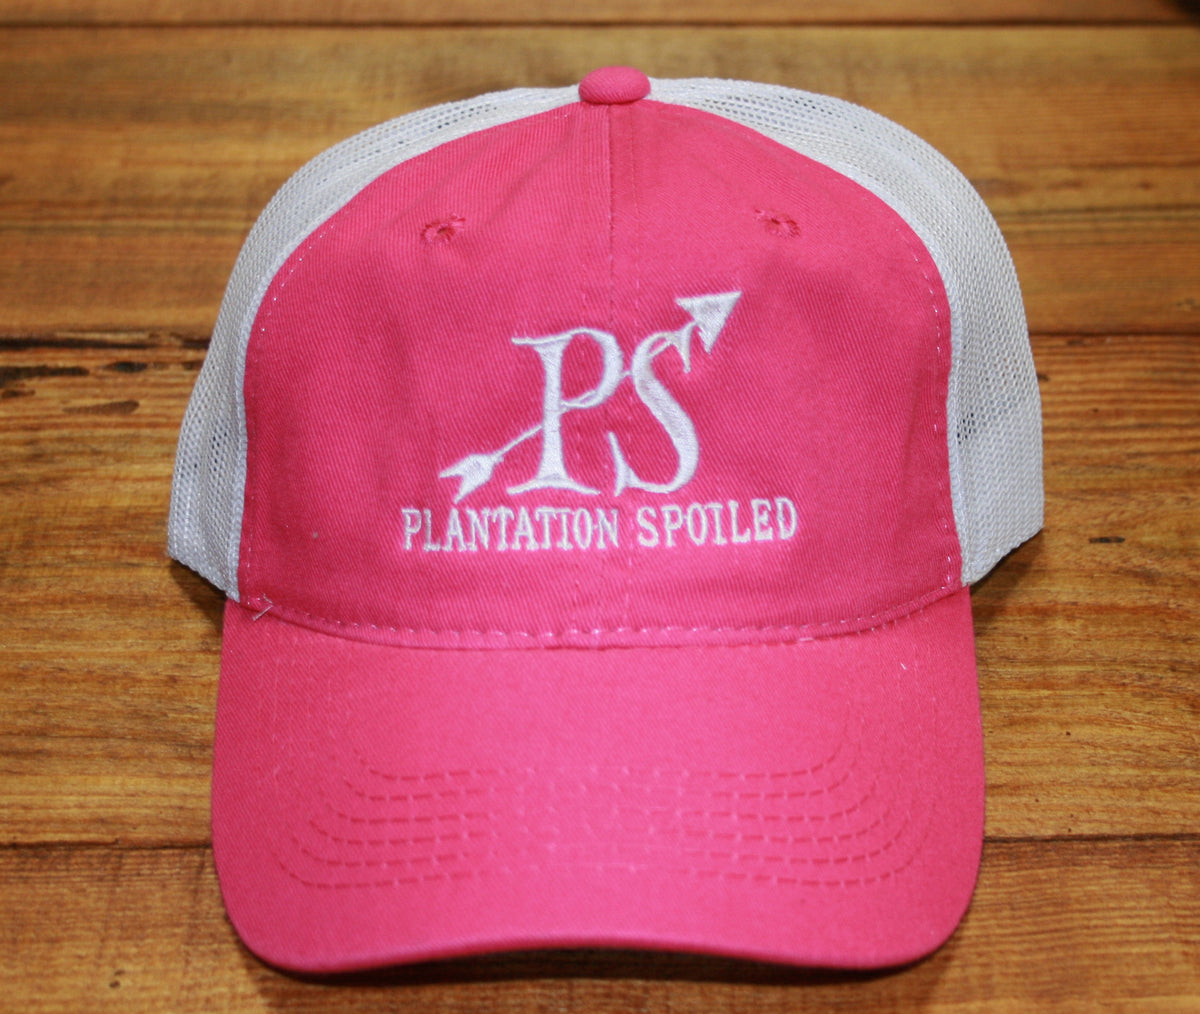 PS Hat